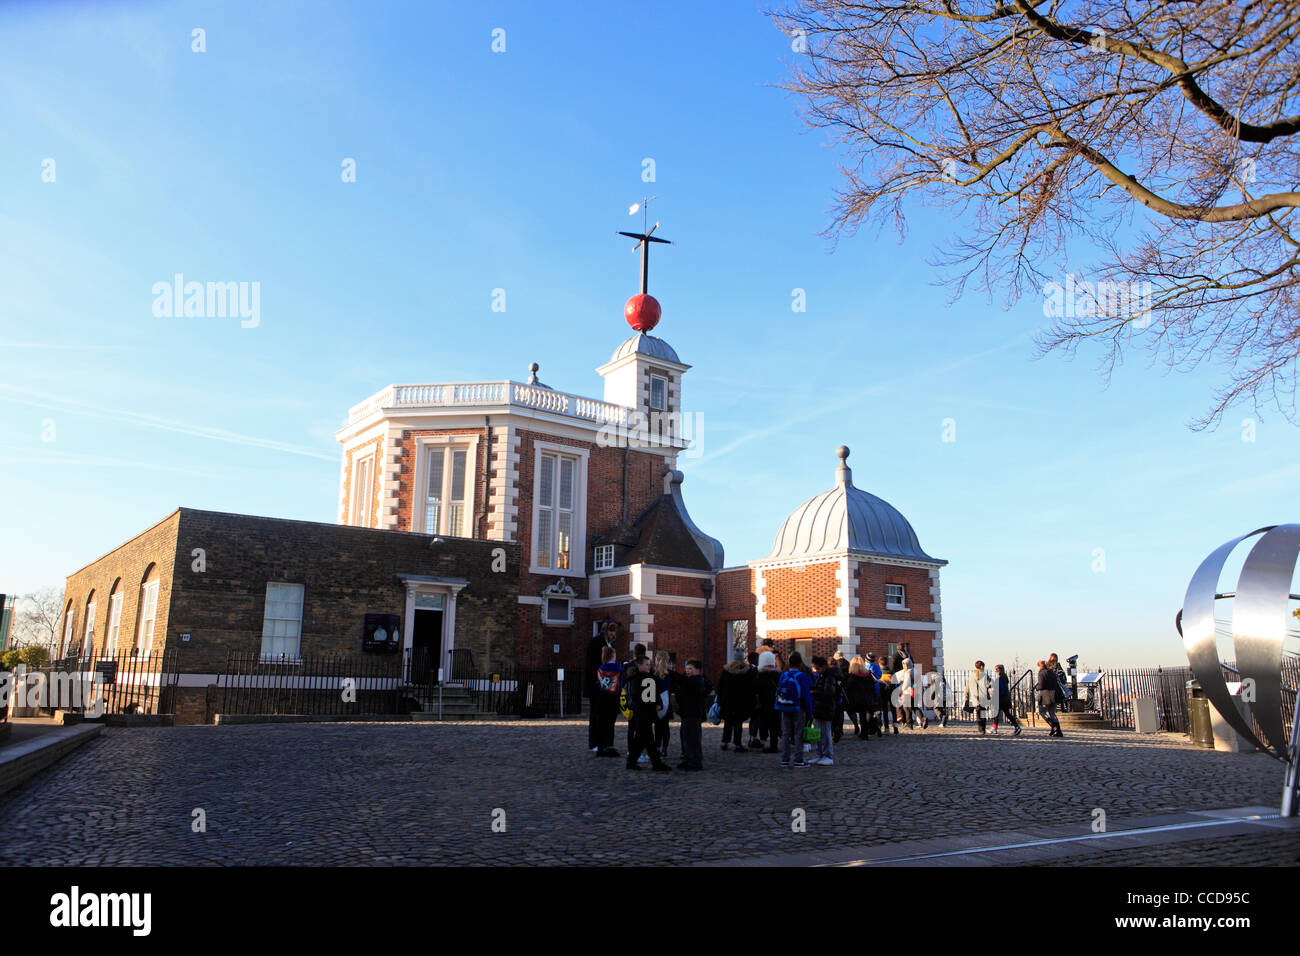 united kingdom south london greenwich the royal observatory flamsteed house Stock Photo